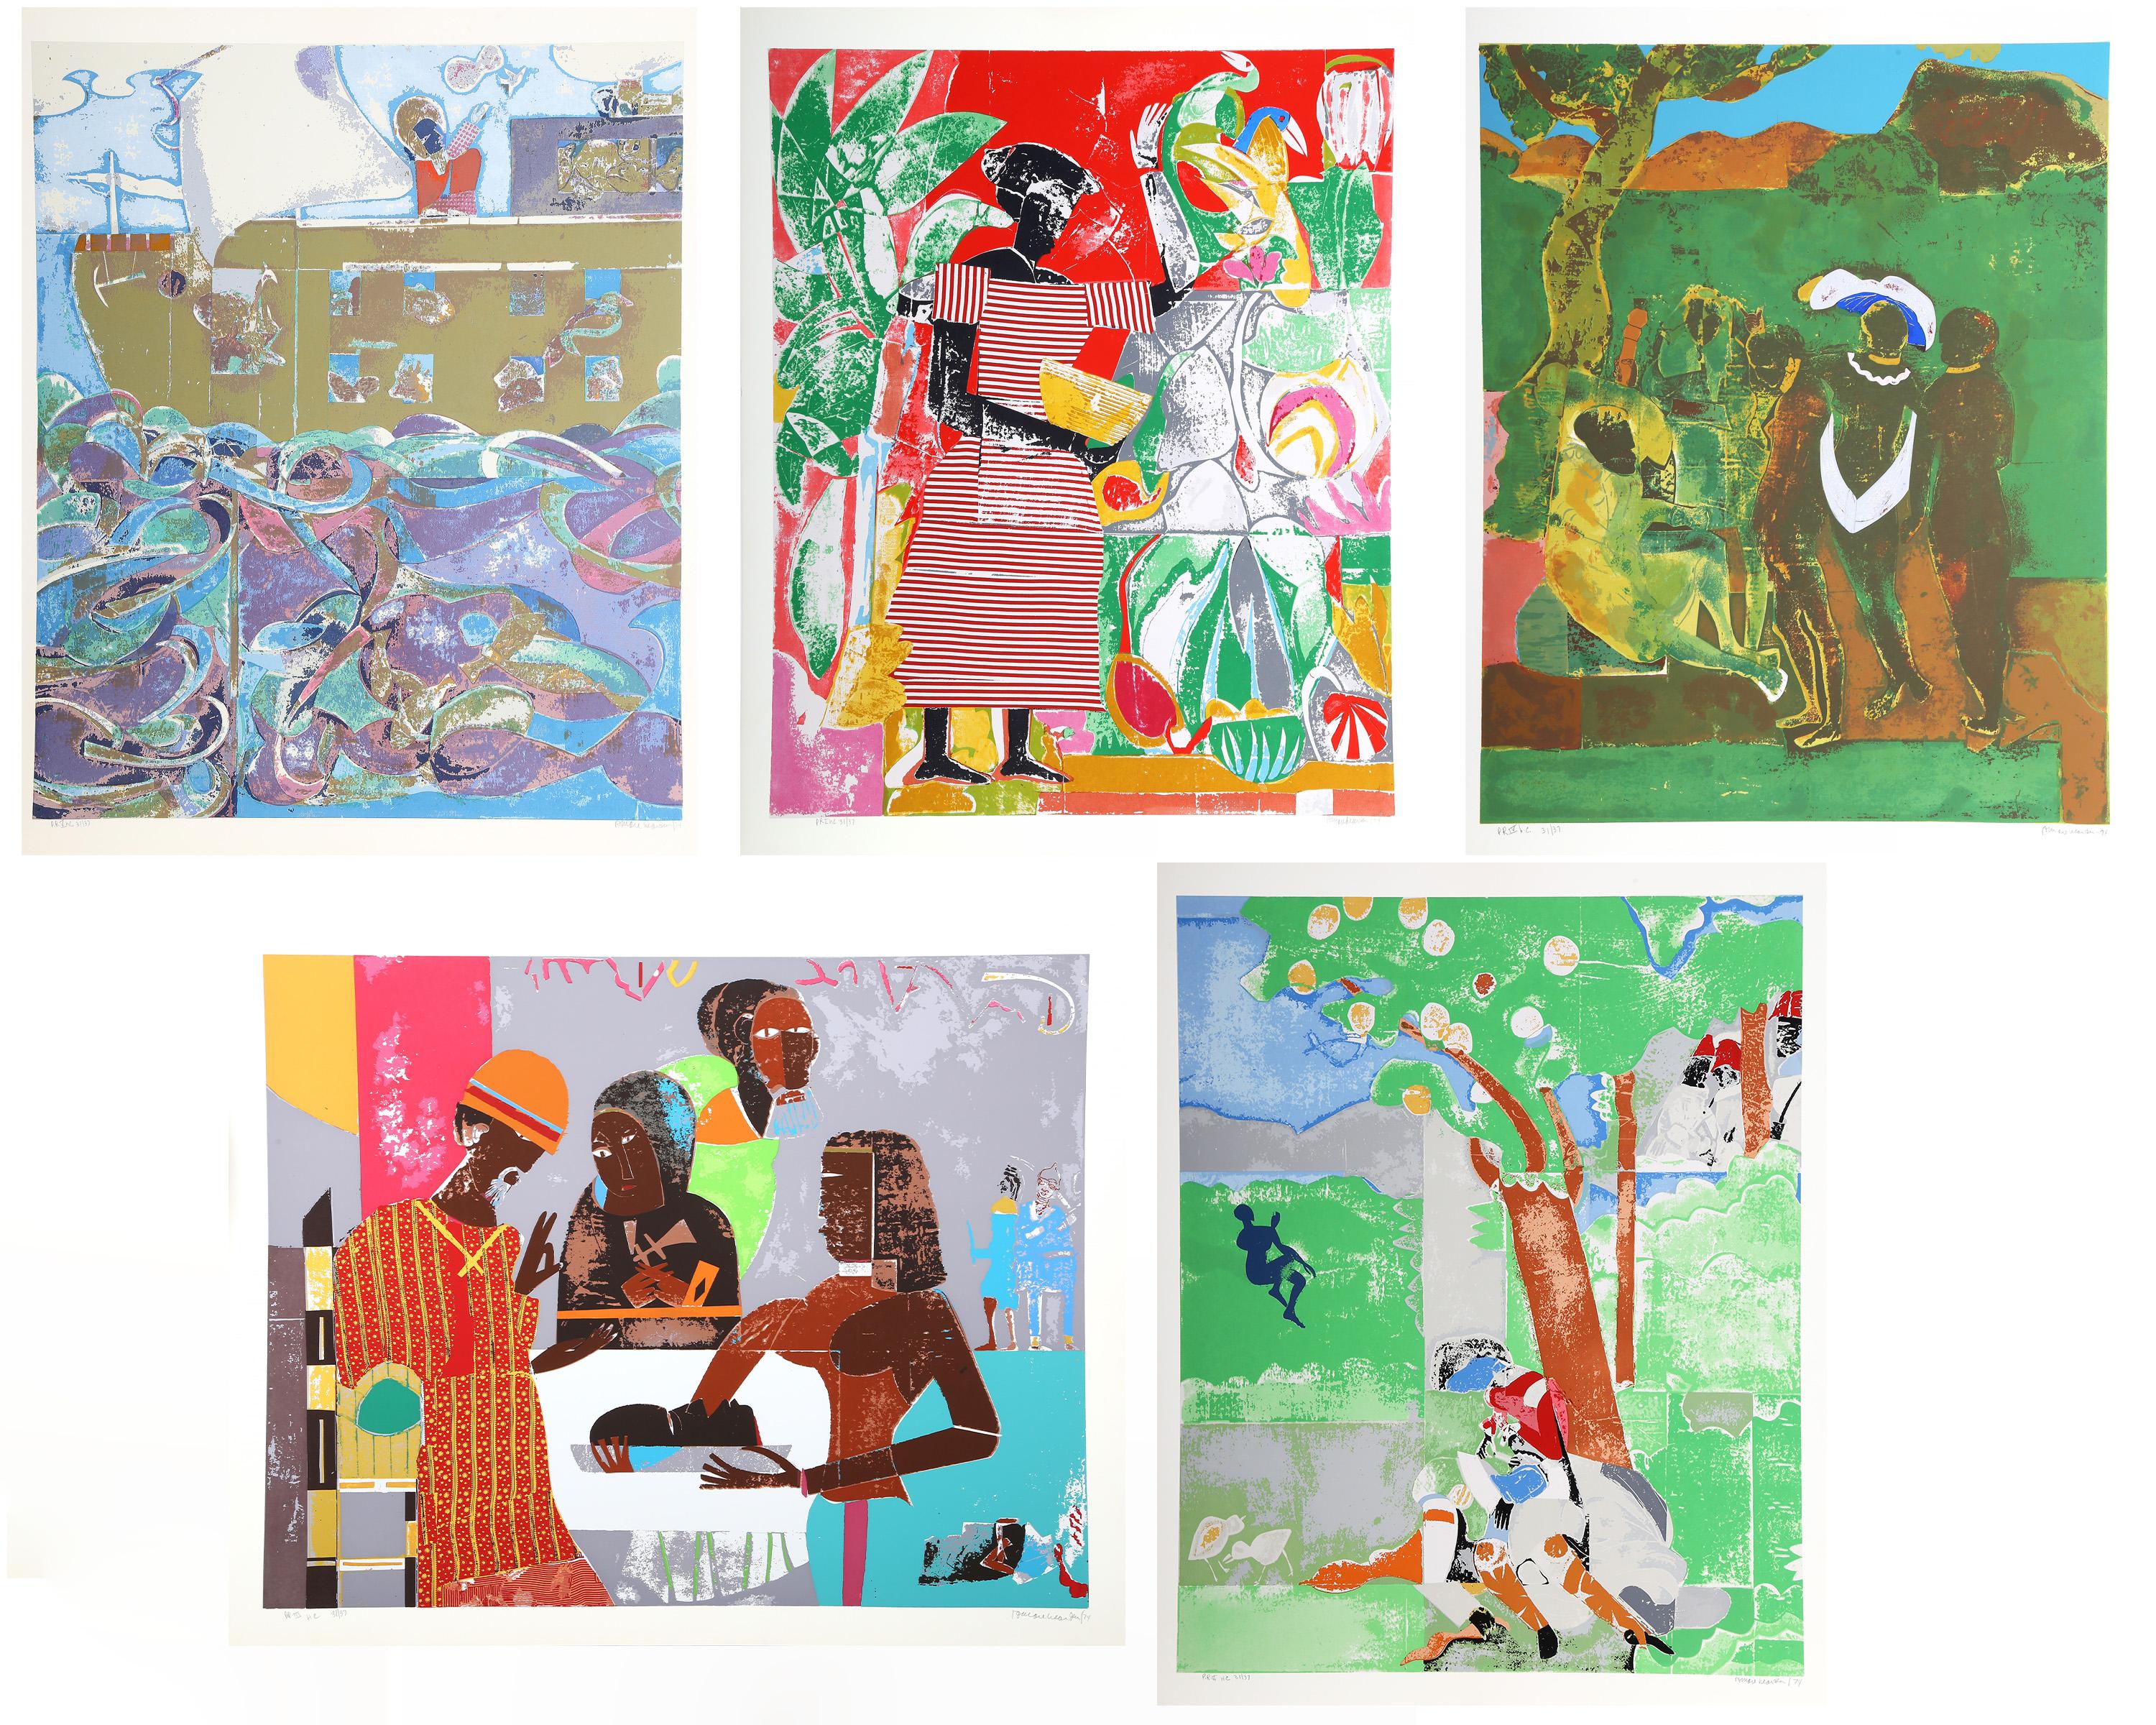 The complete portfolio of Romare Bearden's "Prevalence of Ritual" suite. In 1969, the Art Workers Coalition (AWC) submitted a list of demands to MoMA in New York. Included in this list was the requirement that a "section of the Museum, under the